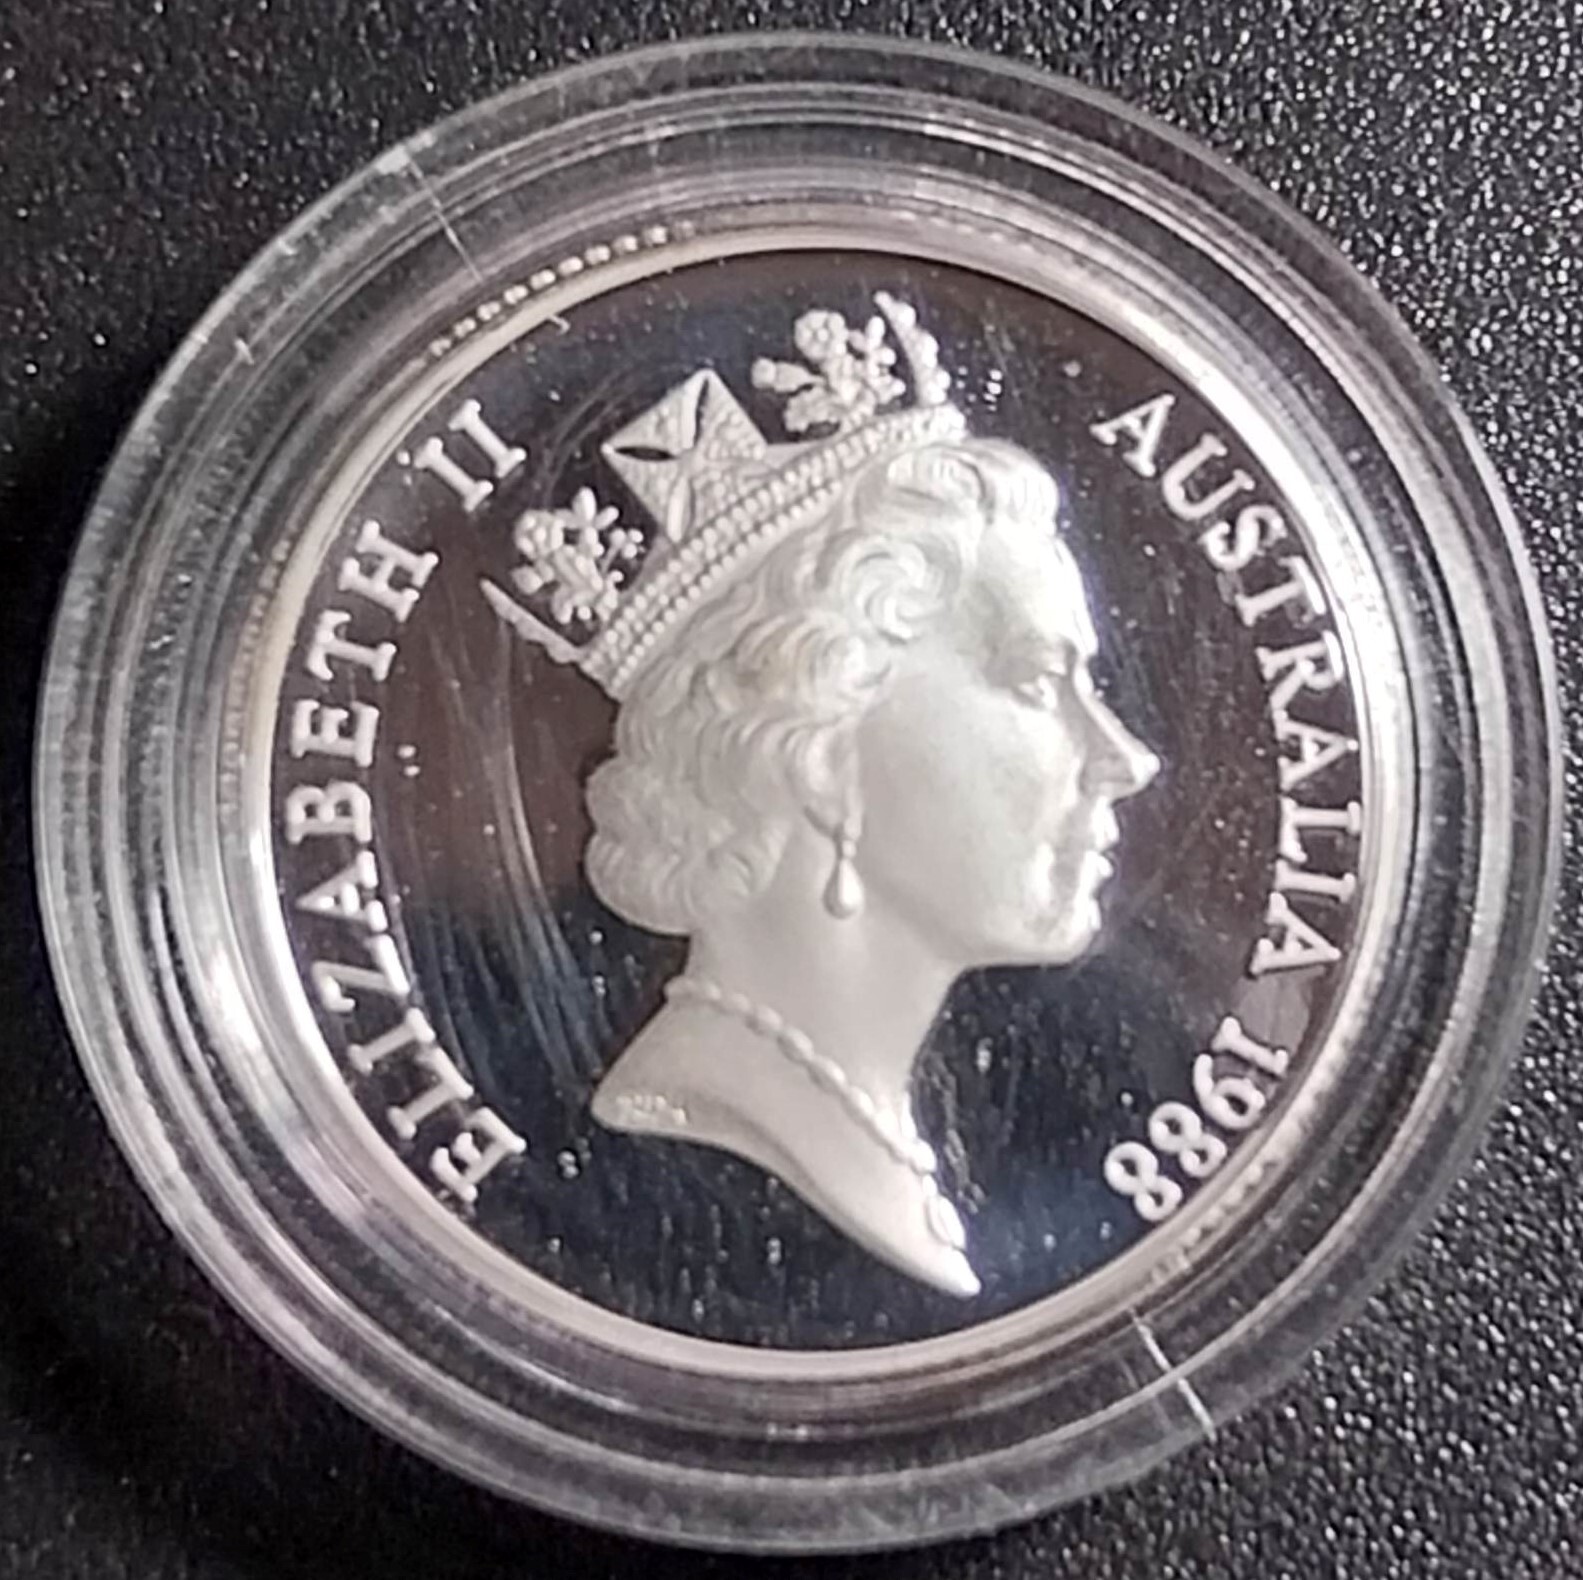 1988 $5 Parliament House Masterpieces In Silver Proof Coin In Capsule